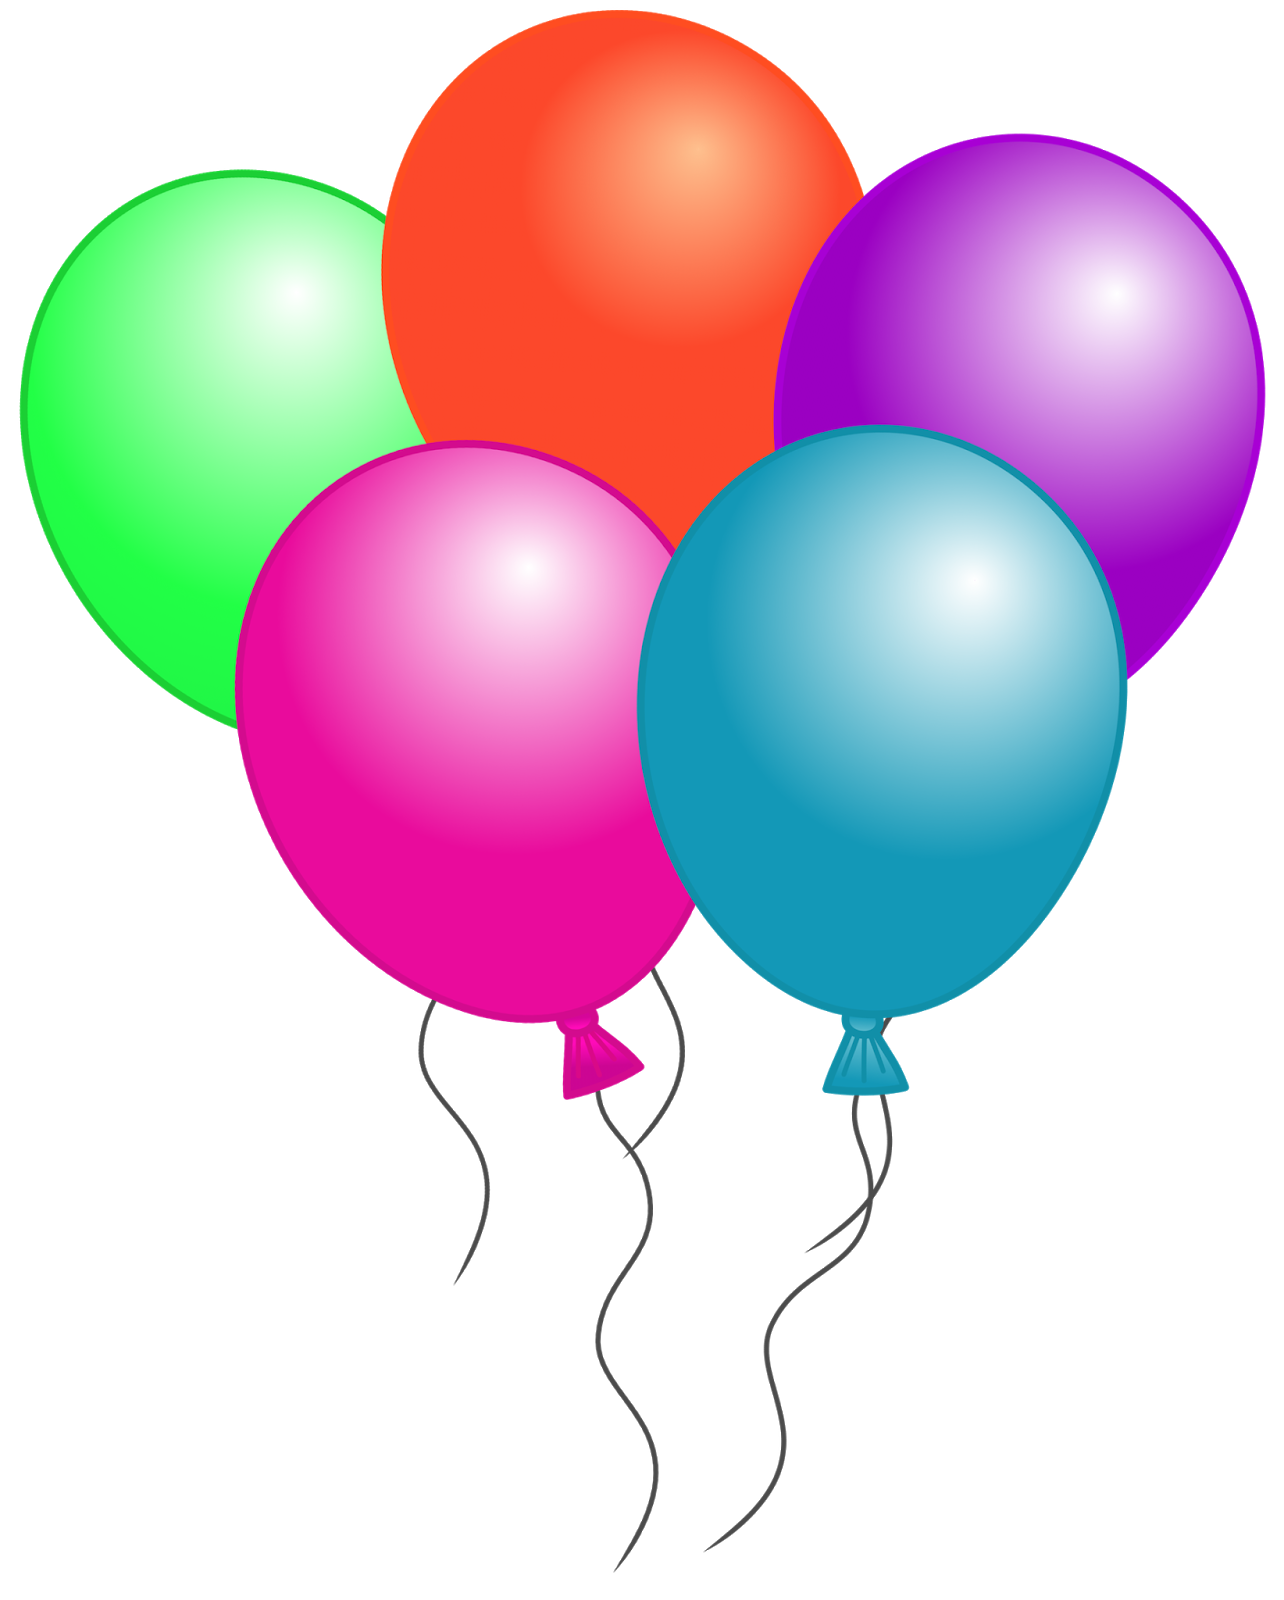 Balloons Images Collection (38+)